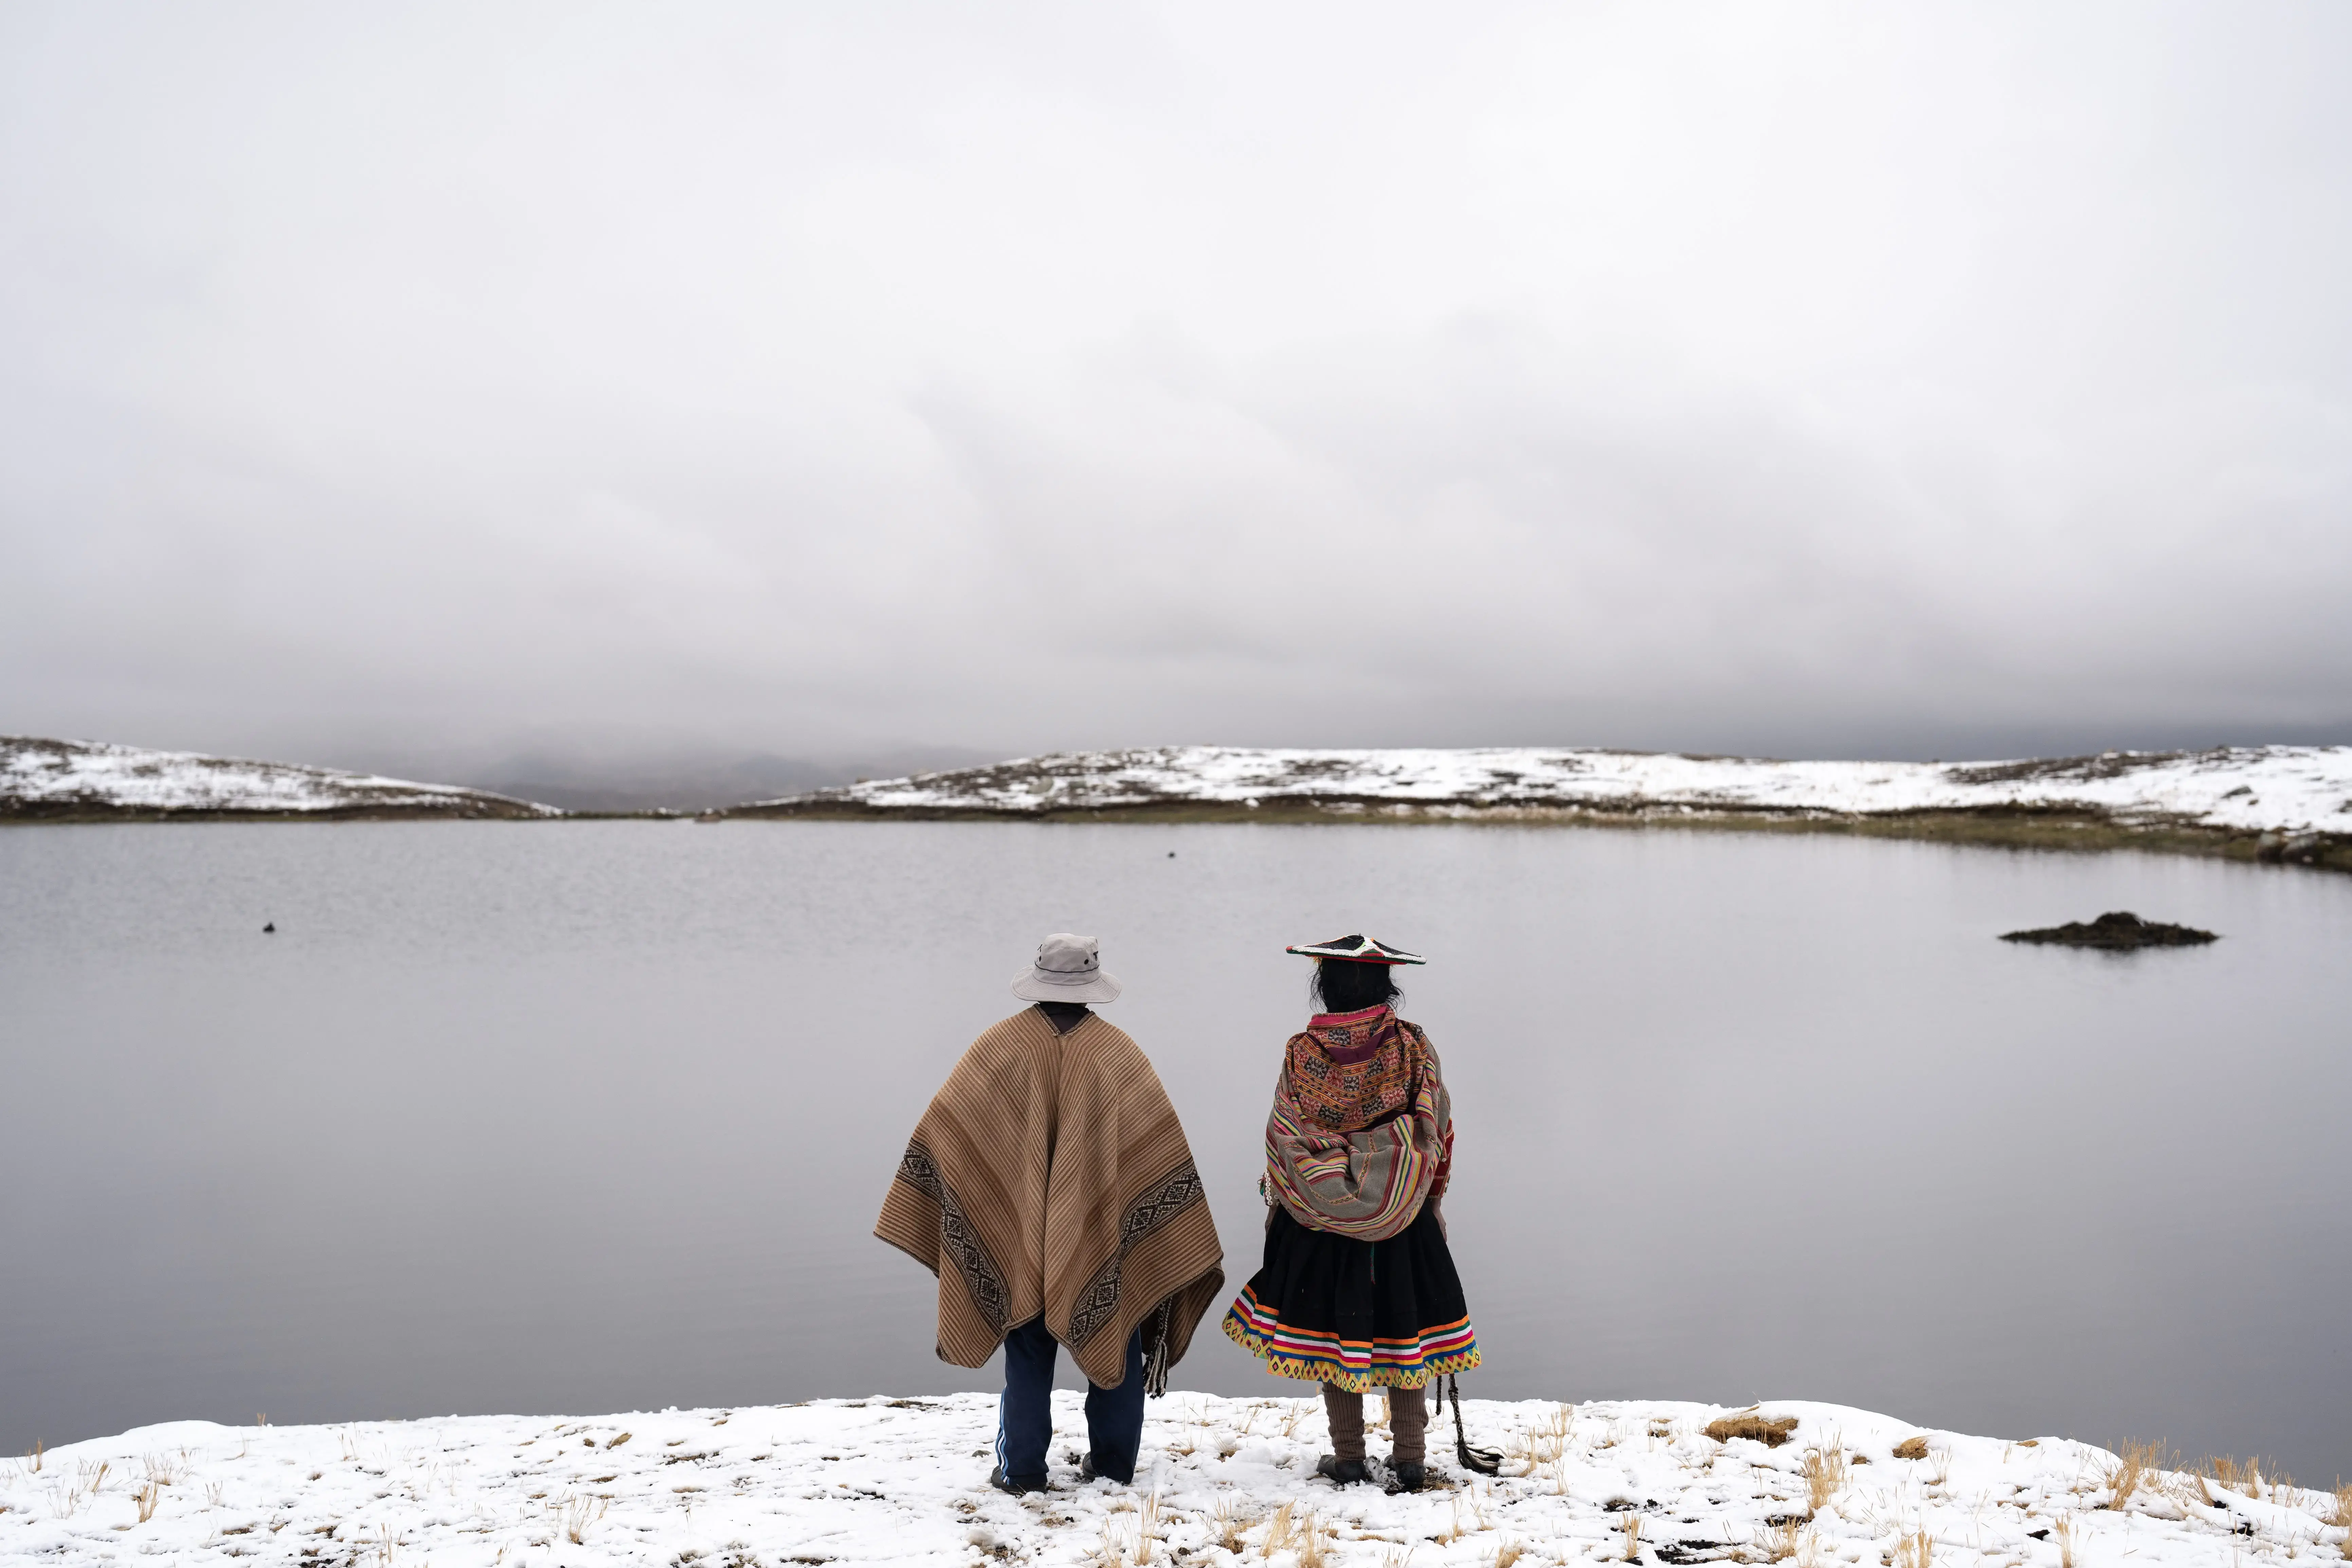 Two people look out over the lake at the foot of the snow-capped Quelccaya.